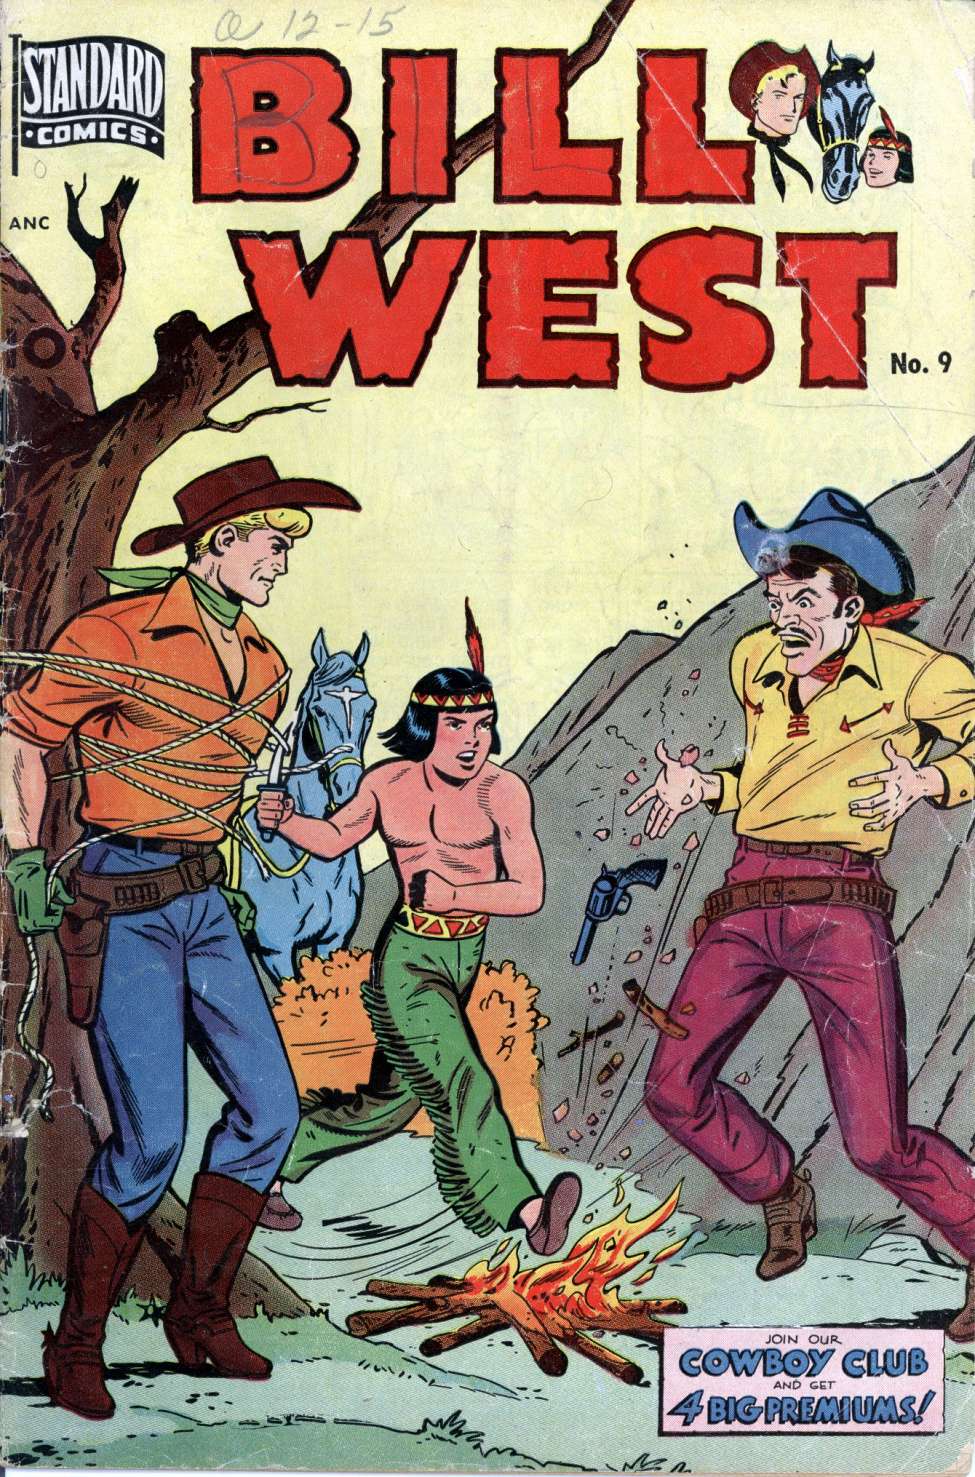 Comic Book Cover For Billy West 9 (alt) - Version 2